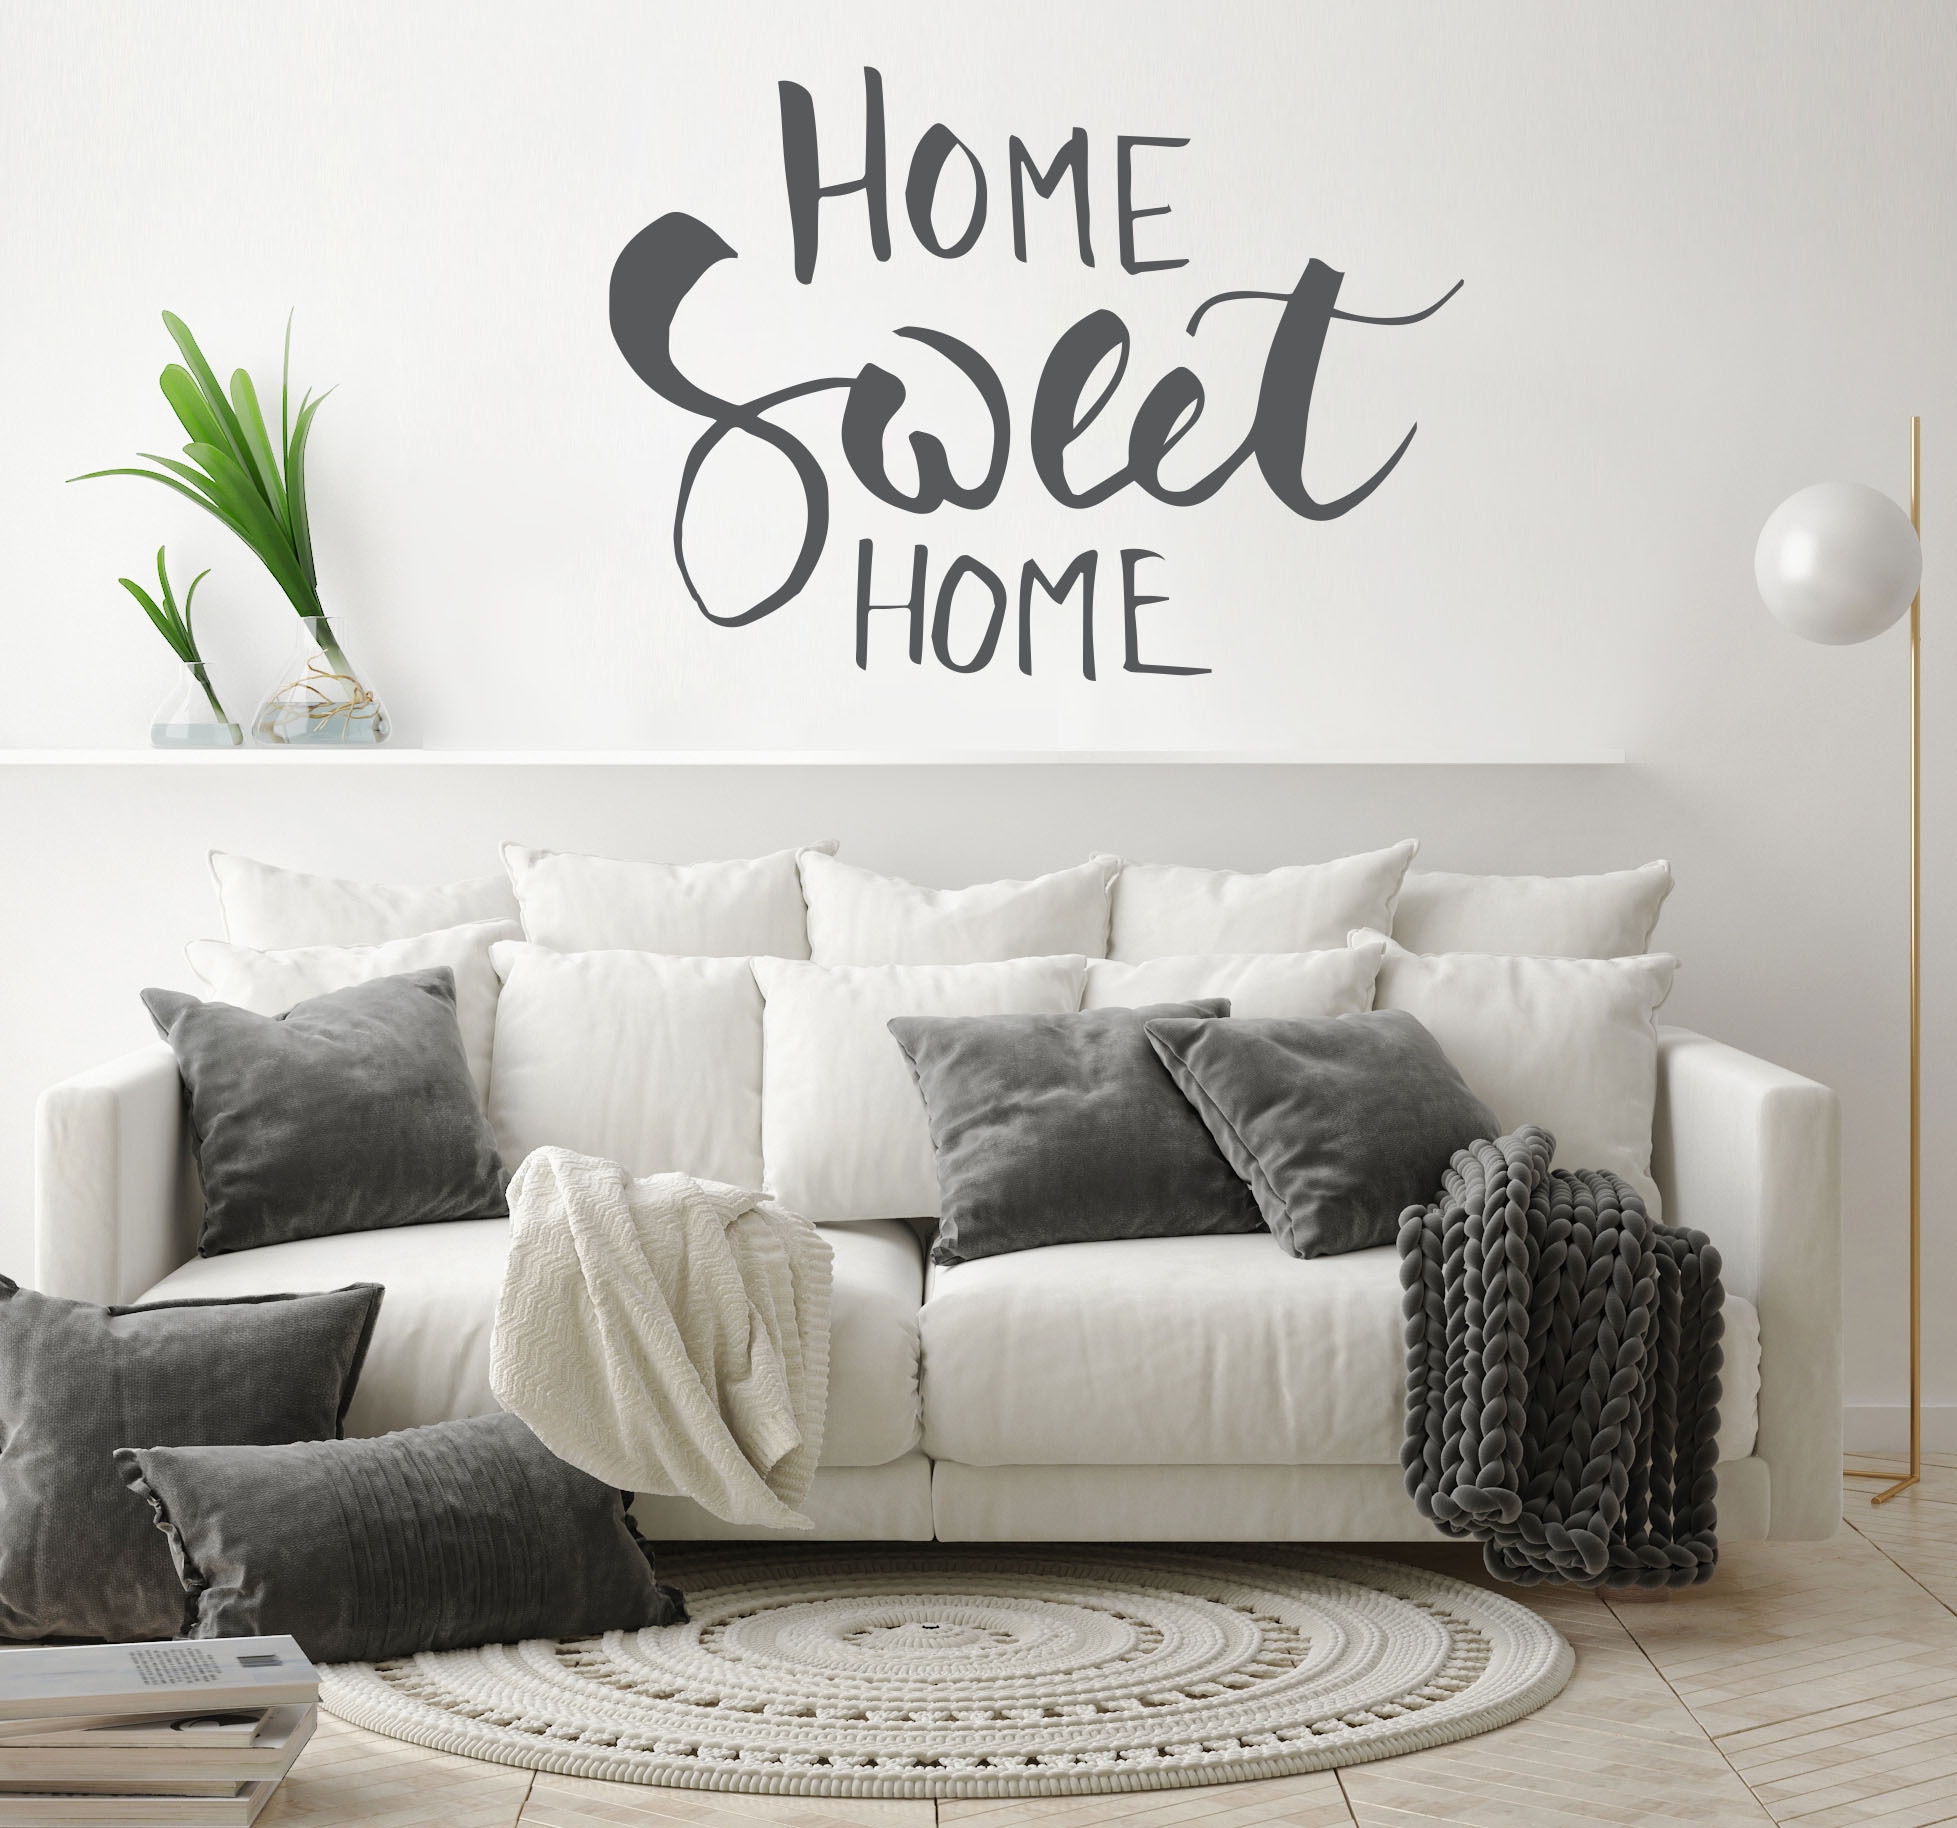 queence Wandtattoo »HOME (1 OTTO bei SWEET HOME«, St.) online